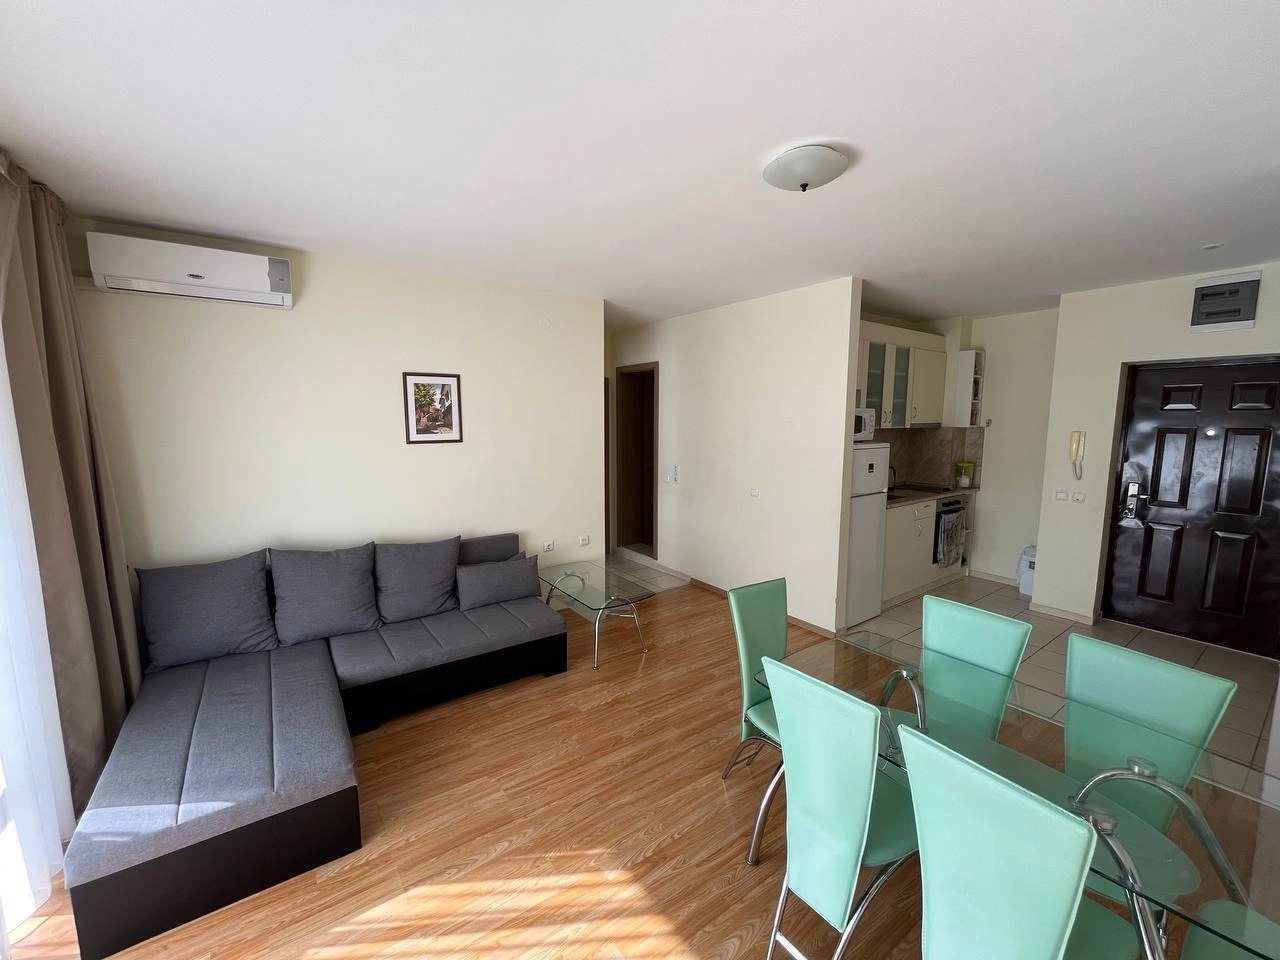 Sale of a two-bedroom apartment with payment in installments